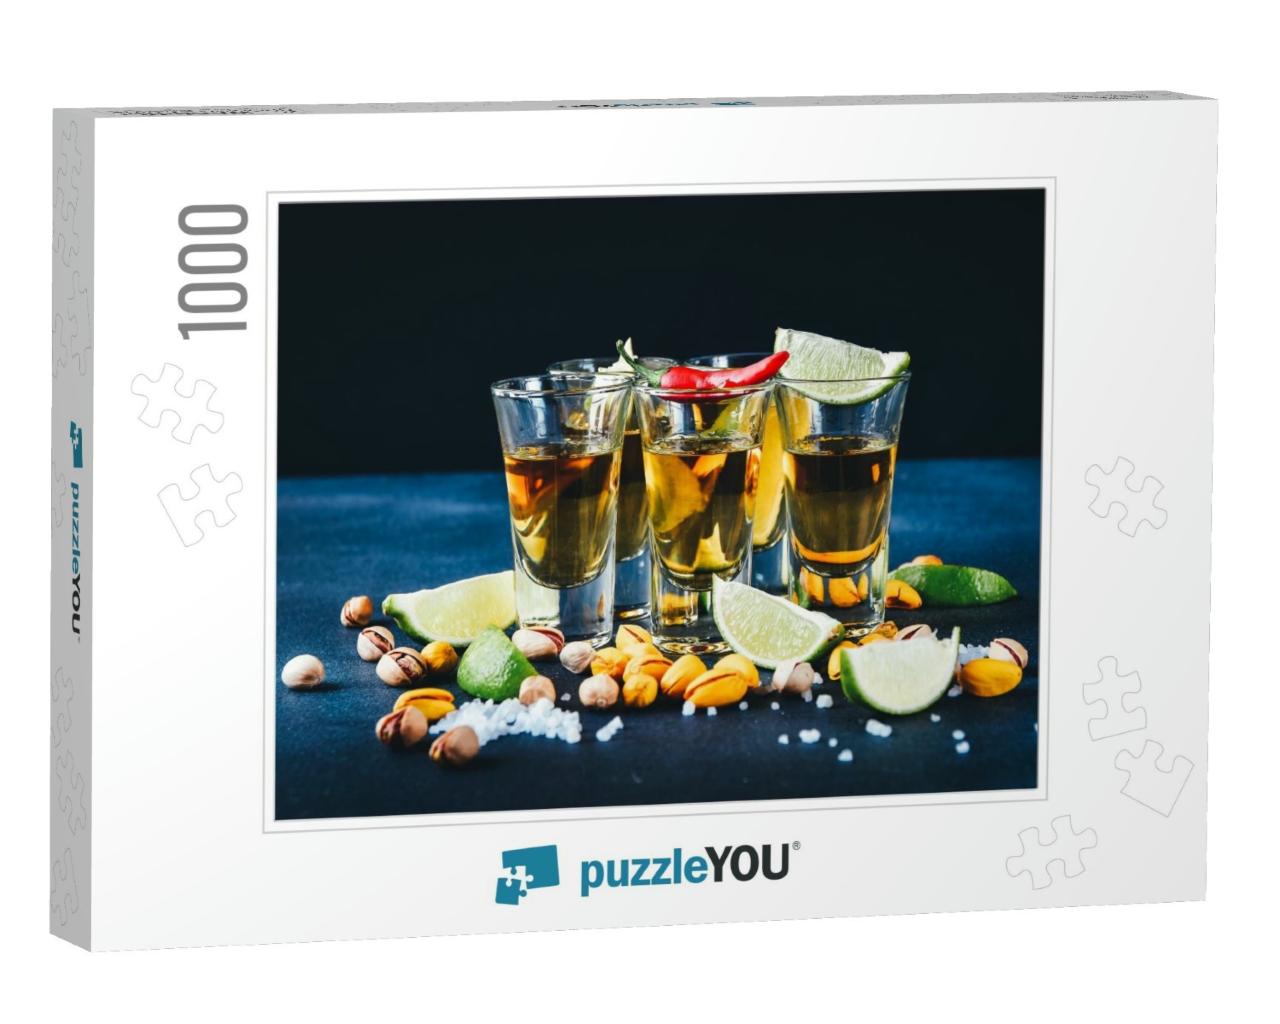 Aperitif with Friends in the Bar, Five Glasses of Alcohol... Jigsaw Puzzle with 1000 pieces